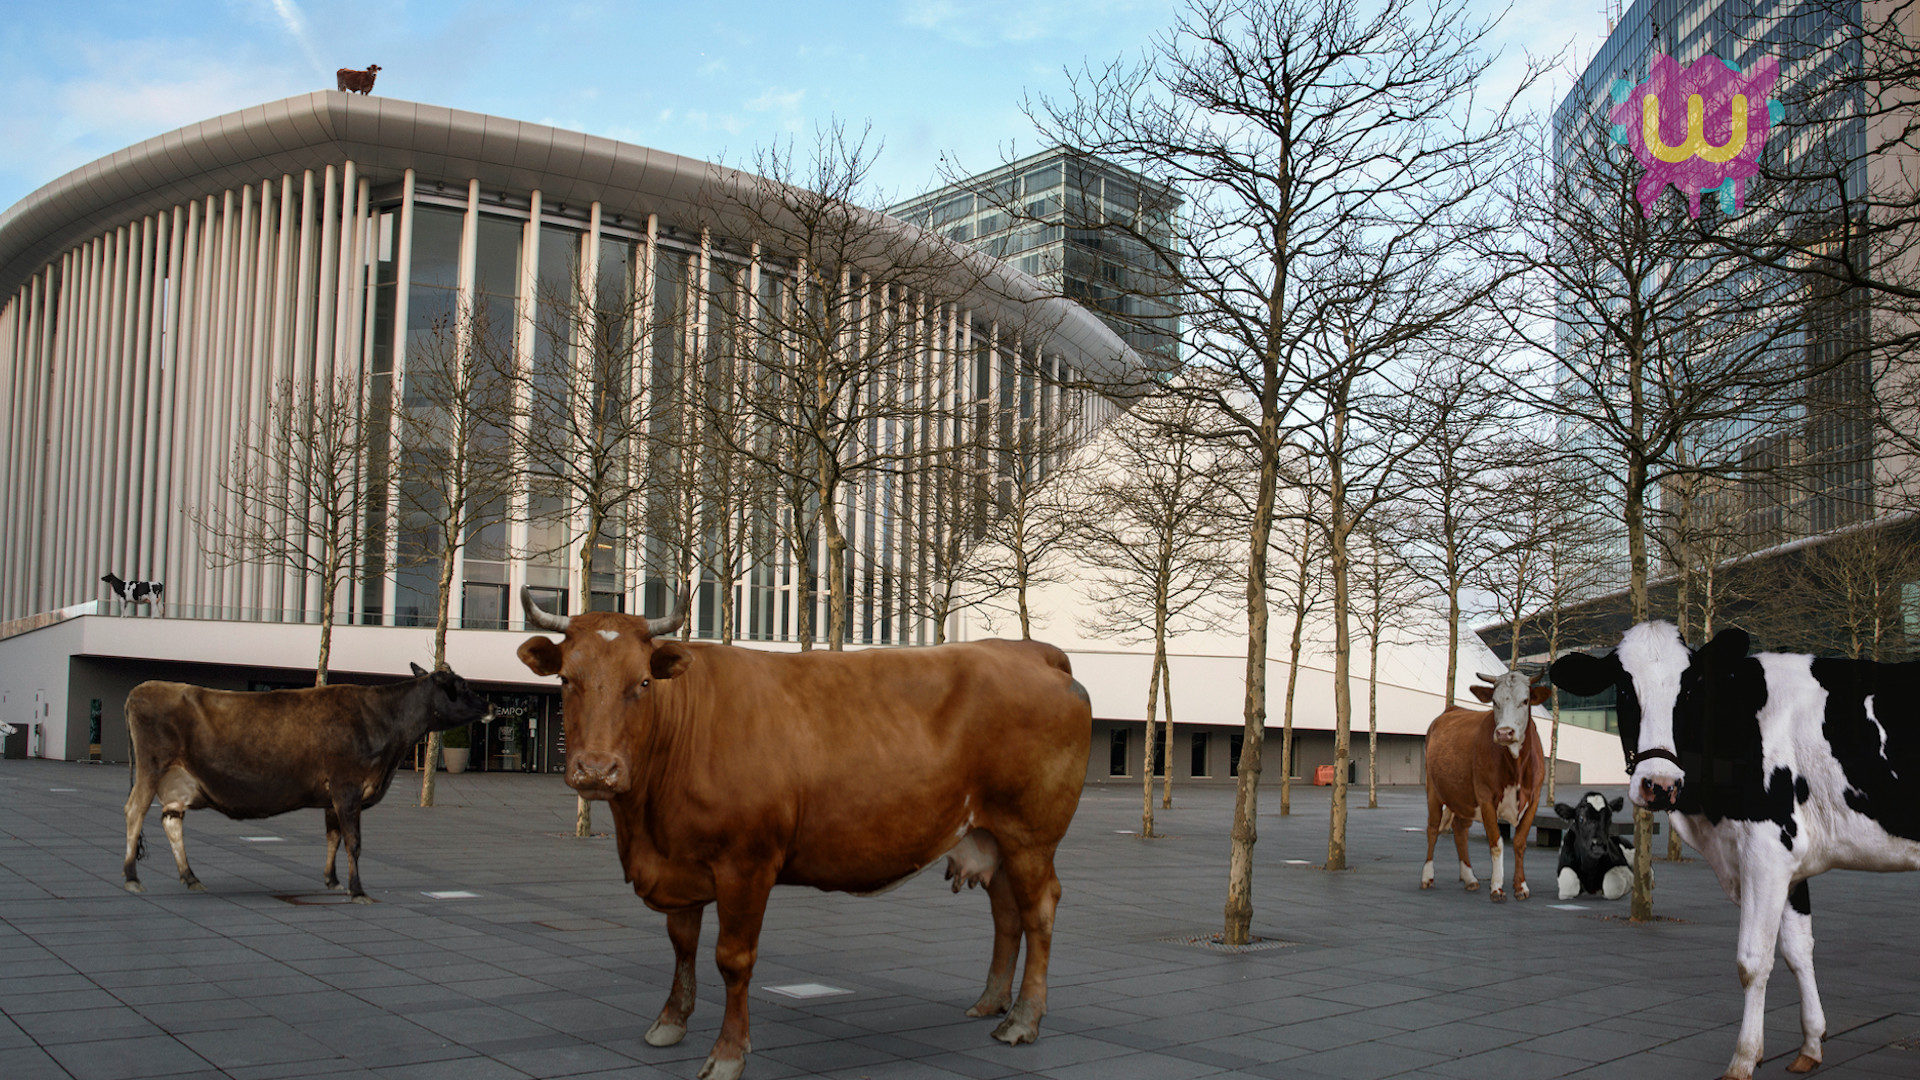 Cows in Kirchberg, Luxembourg